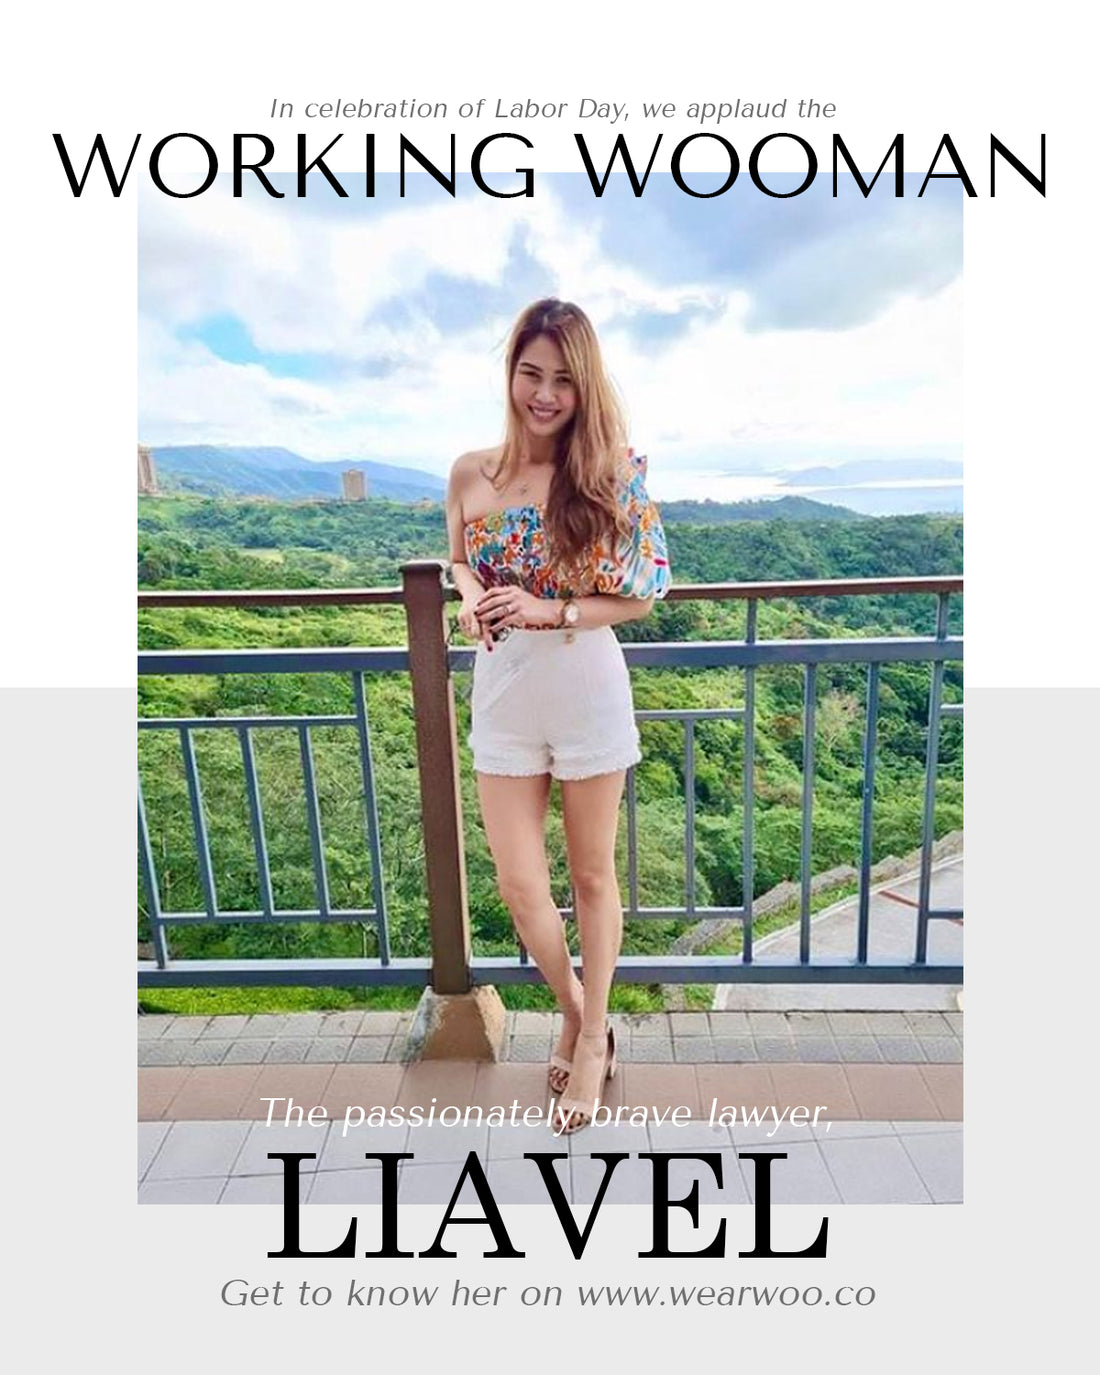 Meet Atty. Liavel, the passionately brave (and gorgeous) lawyer and mother